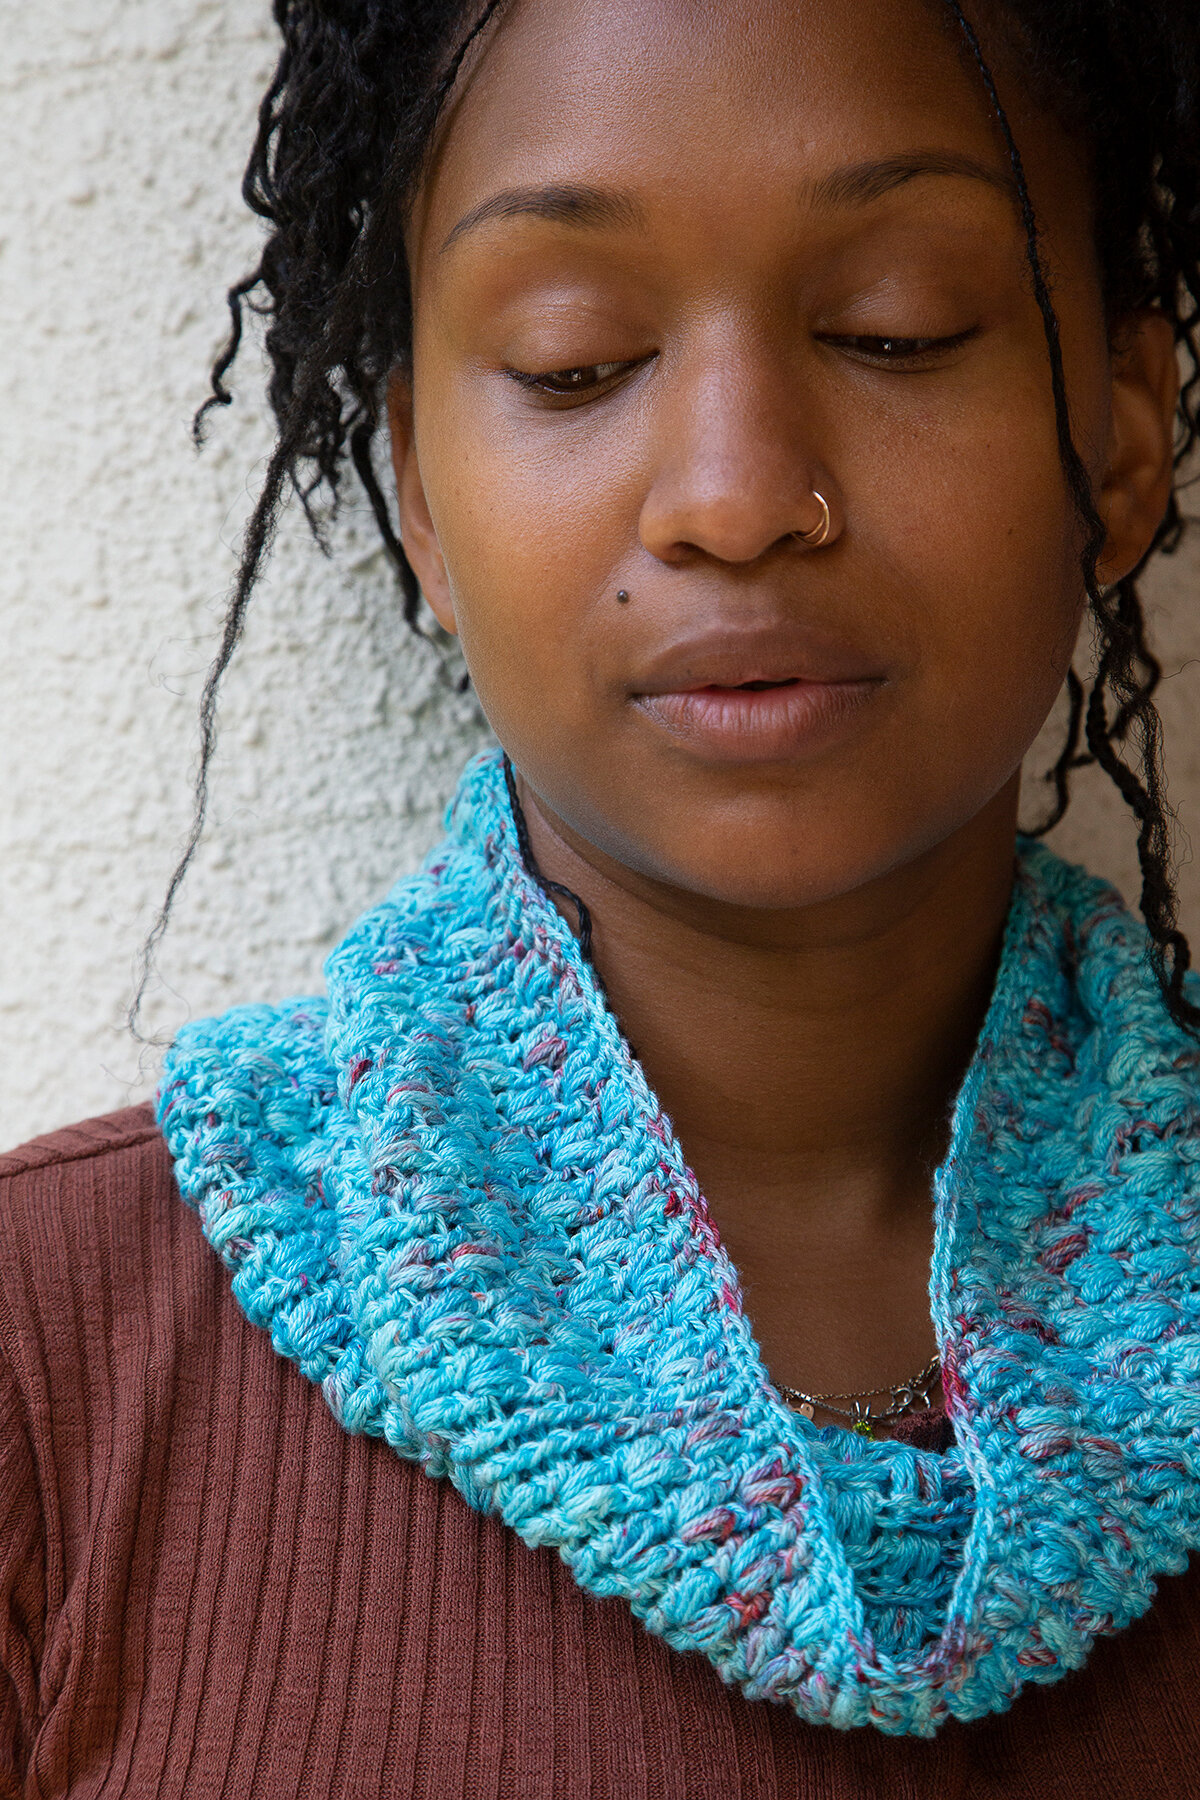 A woman looks downwards while wearing a crocheted Seashell Cowl made of blue yarn around her neck.